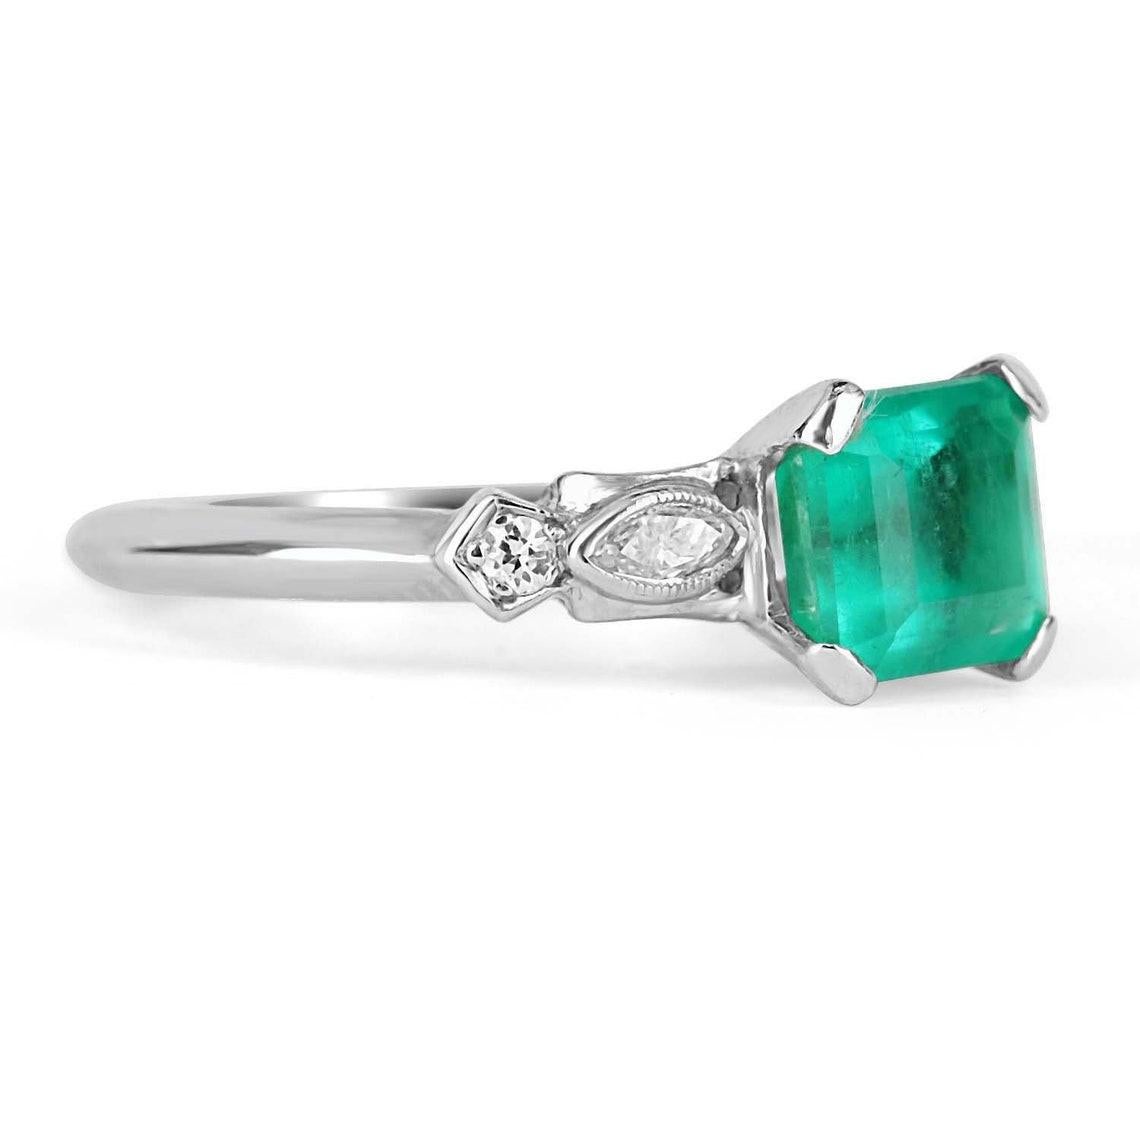 Elegantly displayed is a natural, emerald cut Colombian emerald and diamond accent engagement ring. The center gem is a fine quality, emerald cut, emerald filled with life and brilliance! Among the emeralds, impressive qualities are its vibrant